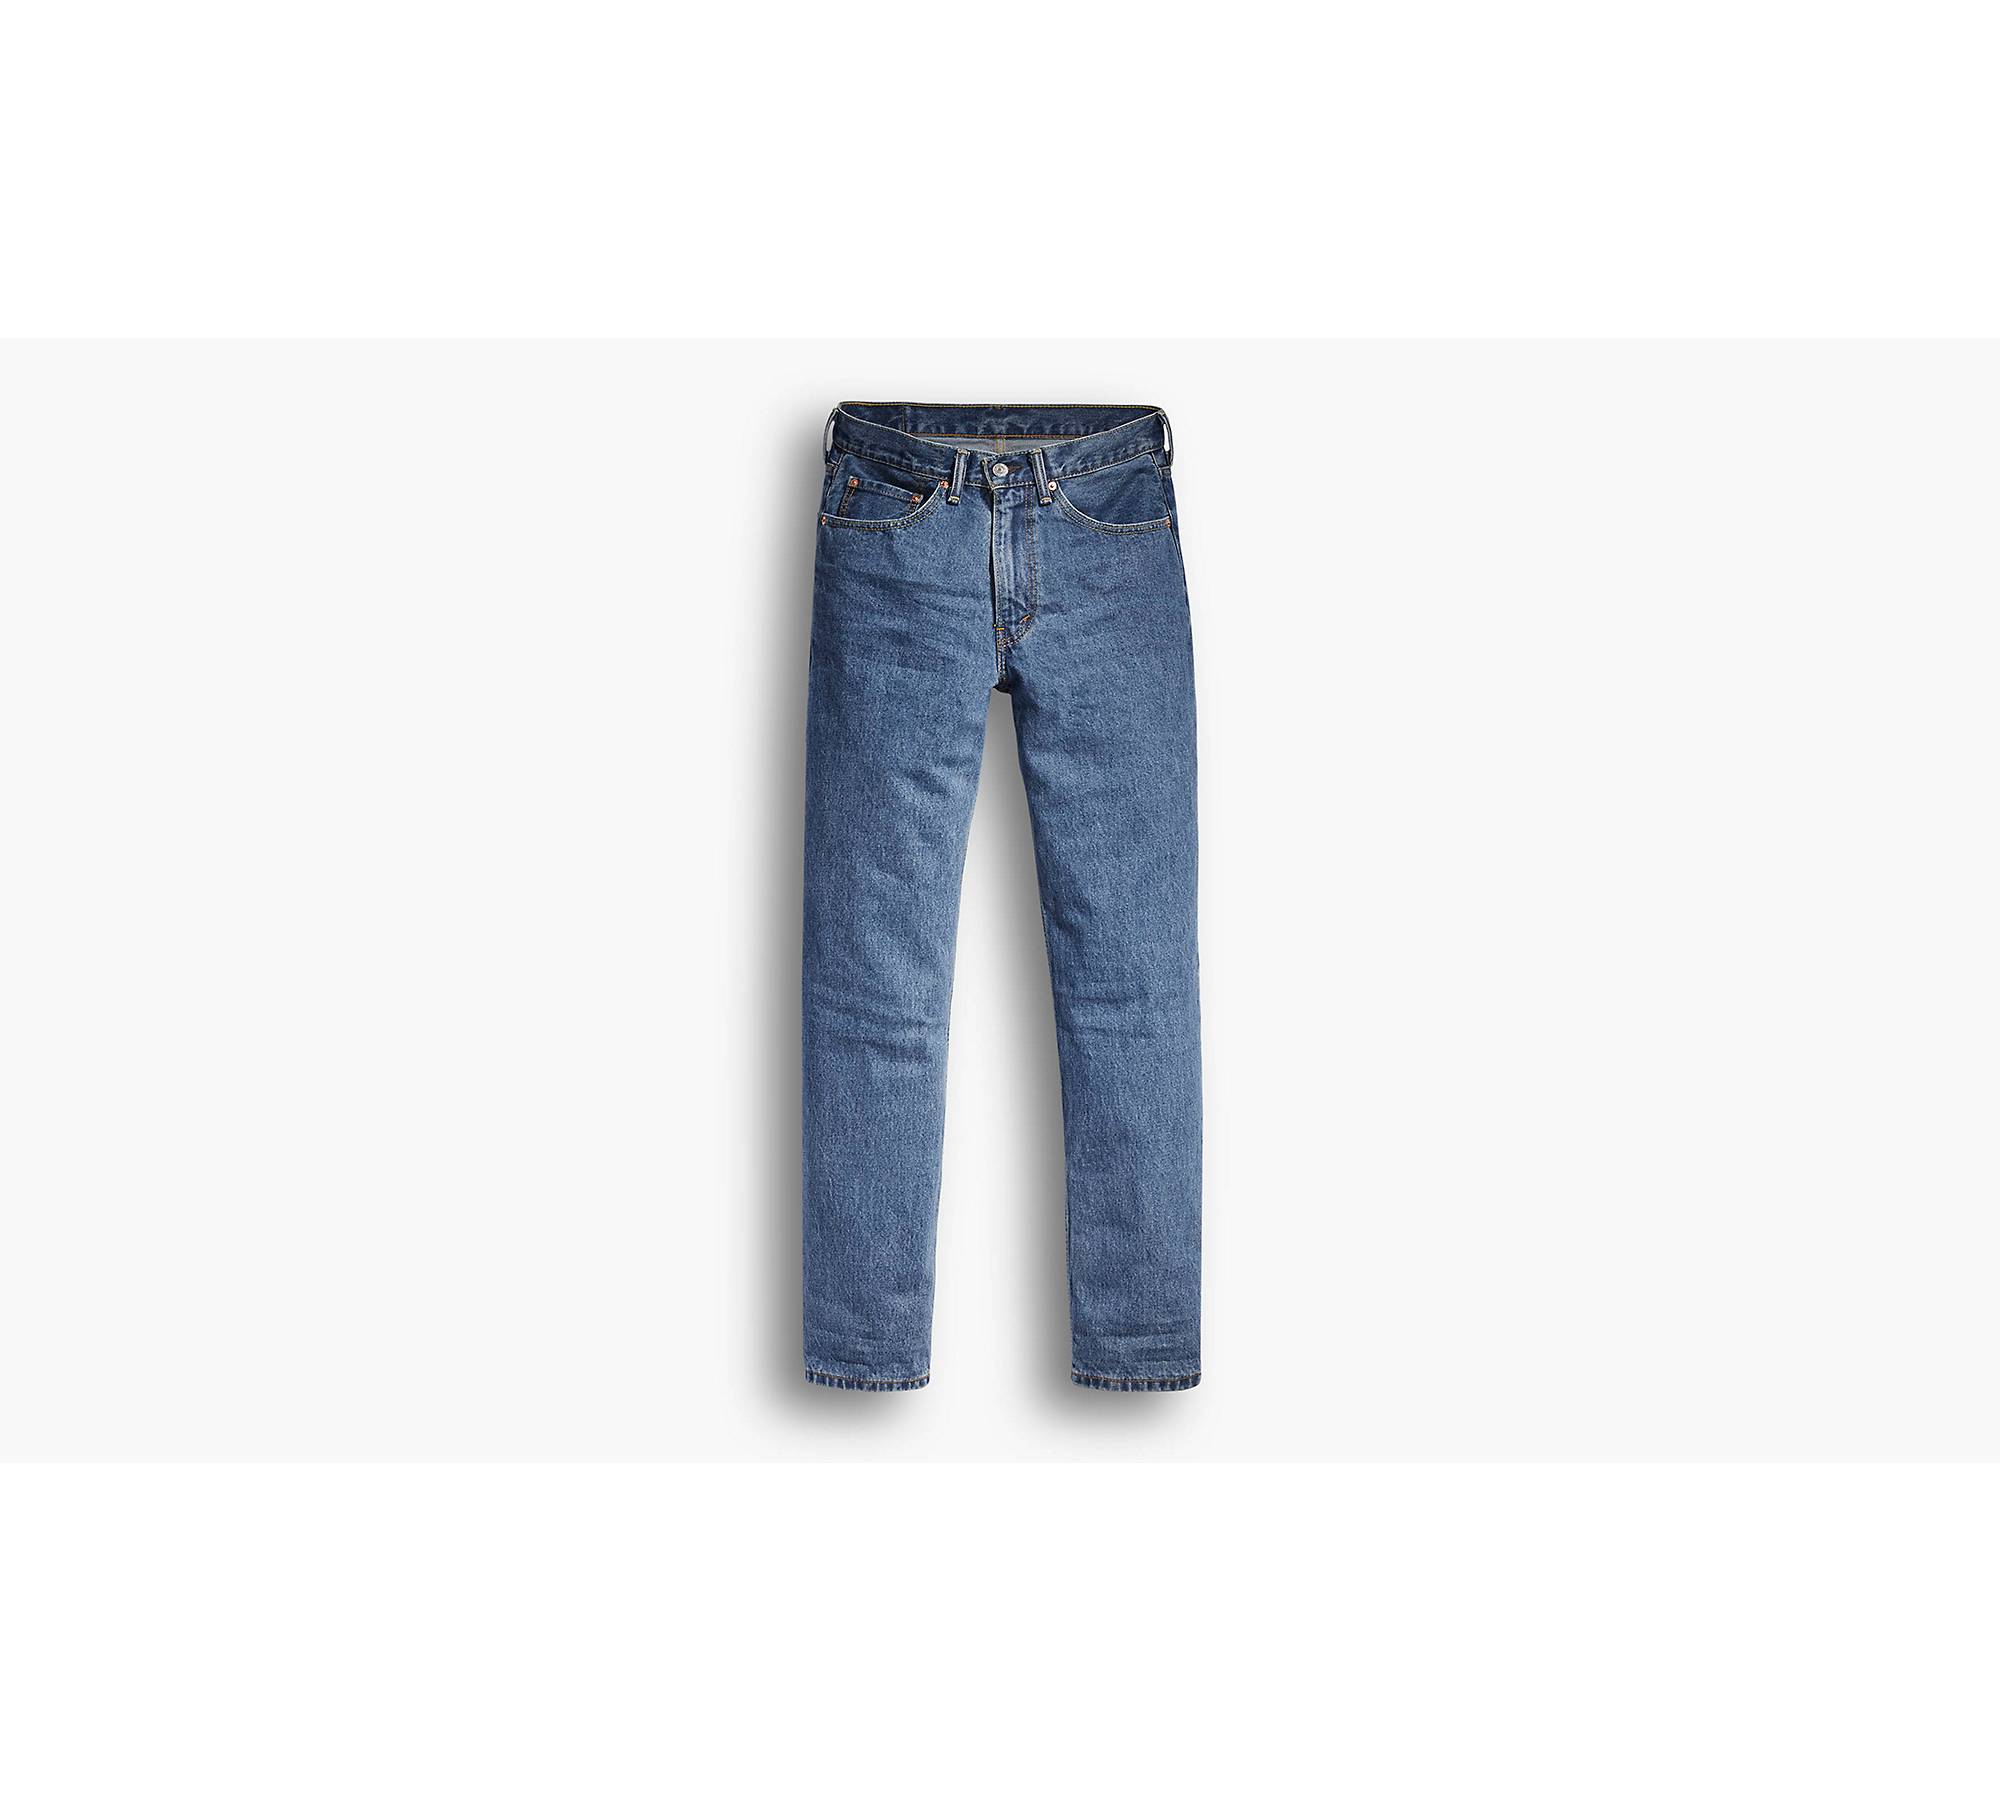 550™ Relaxed Fit Jeans - Medium Wash | US